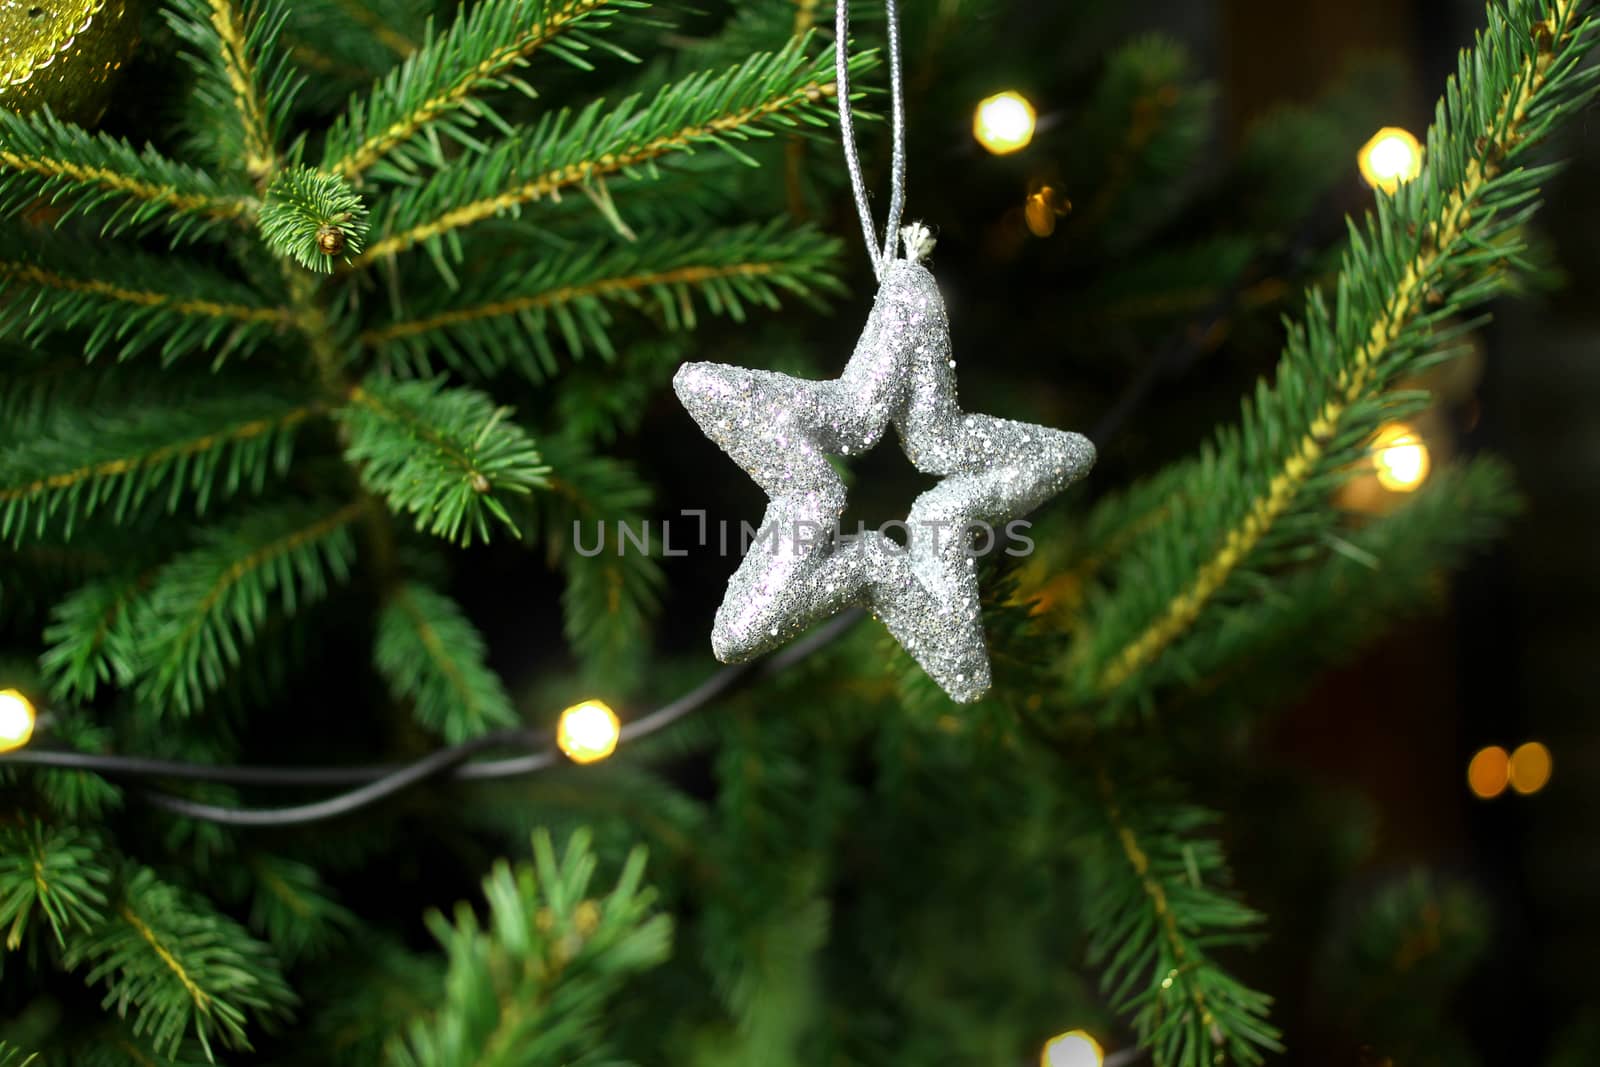 Christmas, silver star on christmas tree branch, lights hanging in a tree 